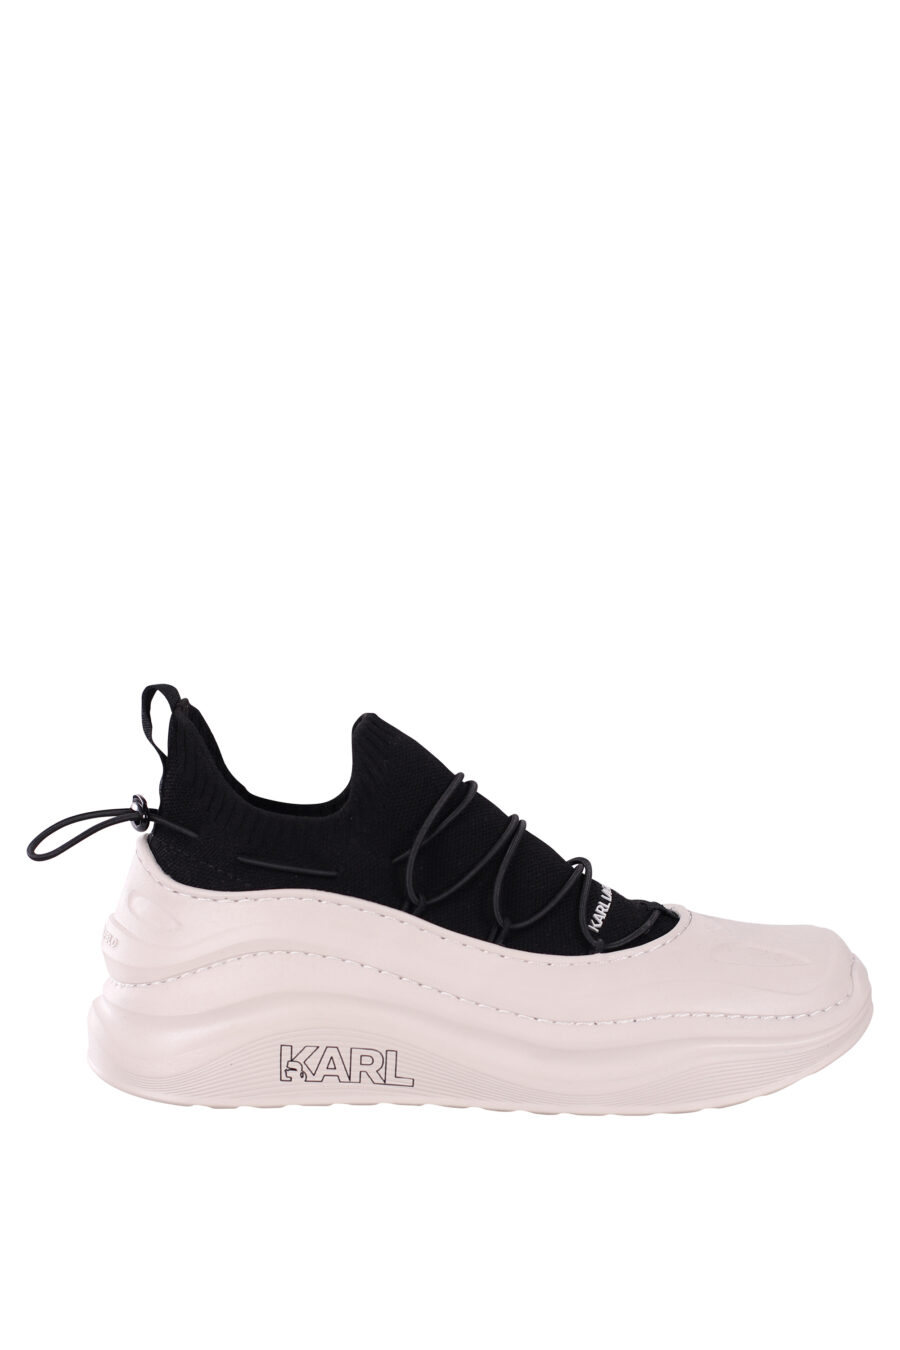 Black and white bicolour trainers with wavy white sole - IMG 5875